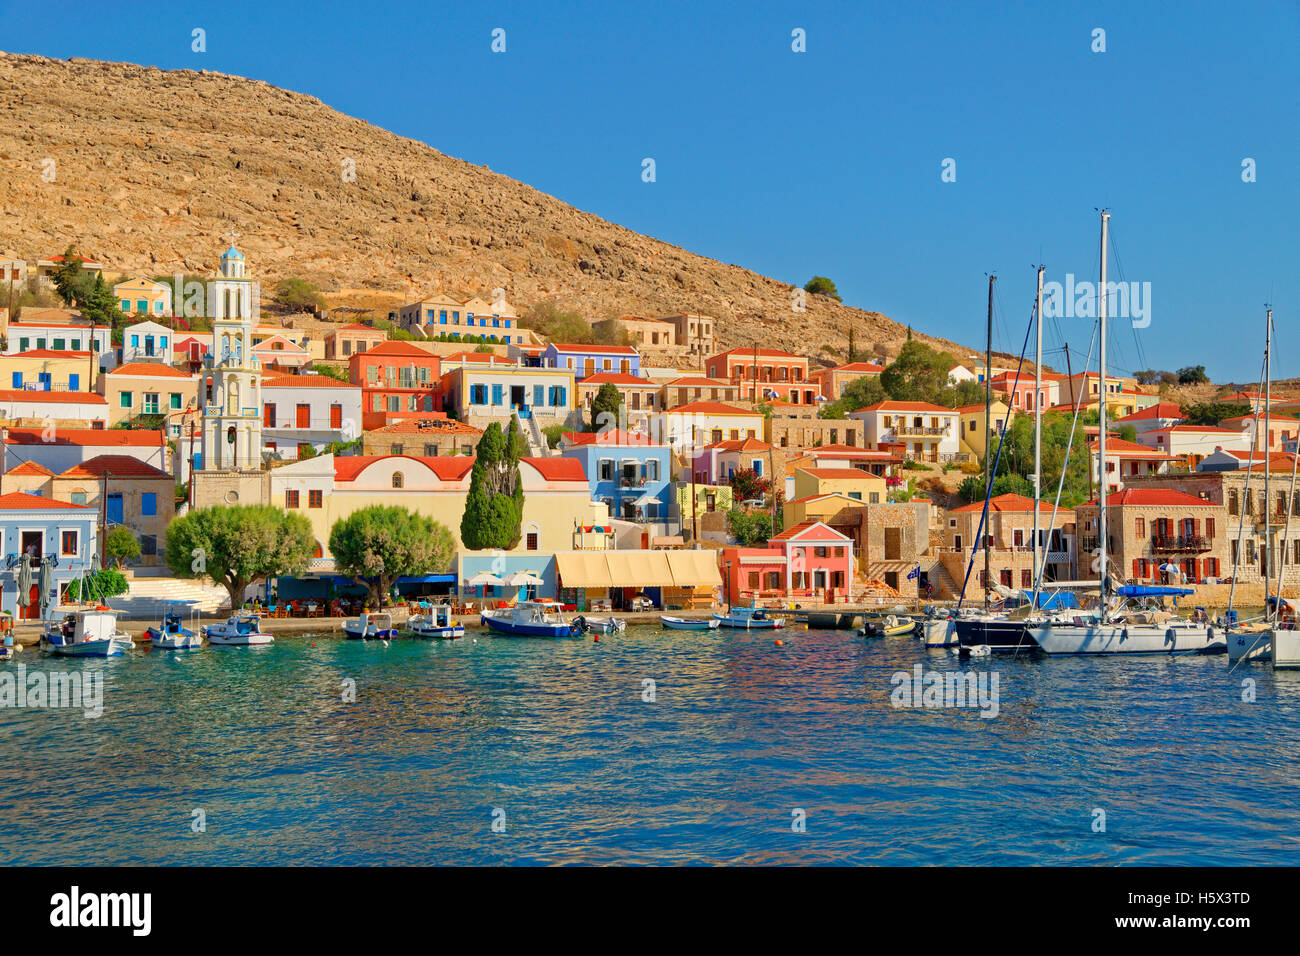 Chalki town on the Greek island of Chalki situated off the north coast of Rhodes in the Dodecanese Island group, Greece. Stock Photo